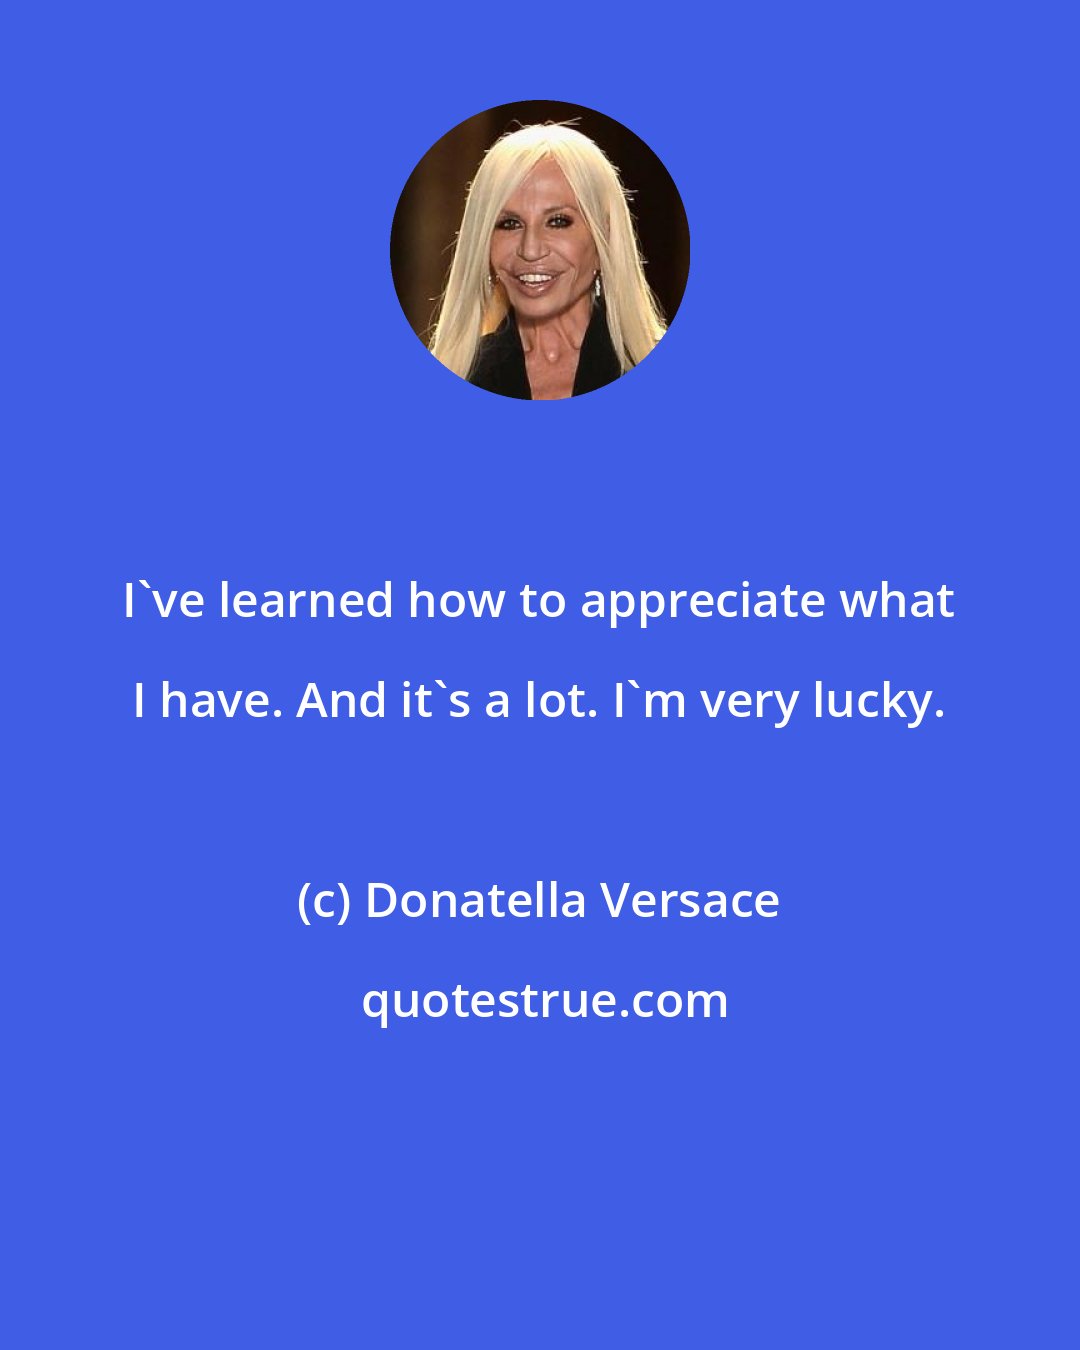 Donatella Versace: I've learned how to appreciate what I have. And it's a lot. I'm very lucky.